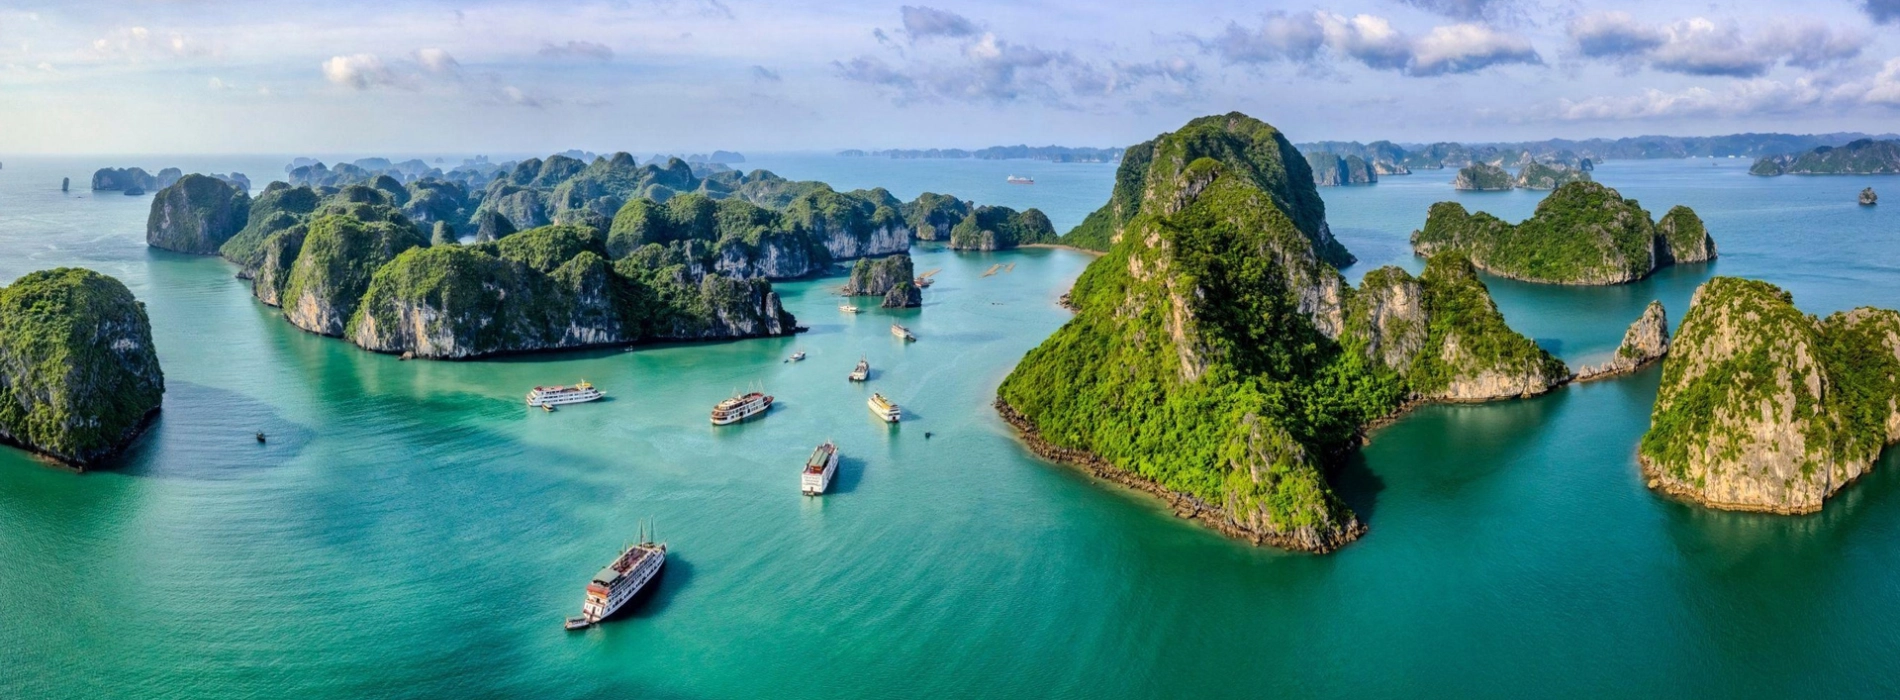 How to book a Ha Long Bay cruise?